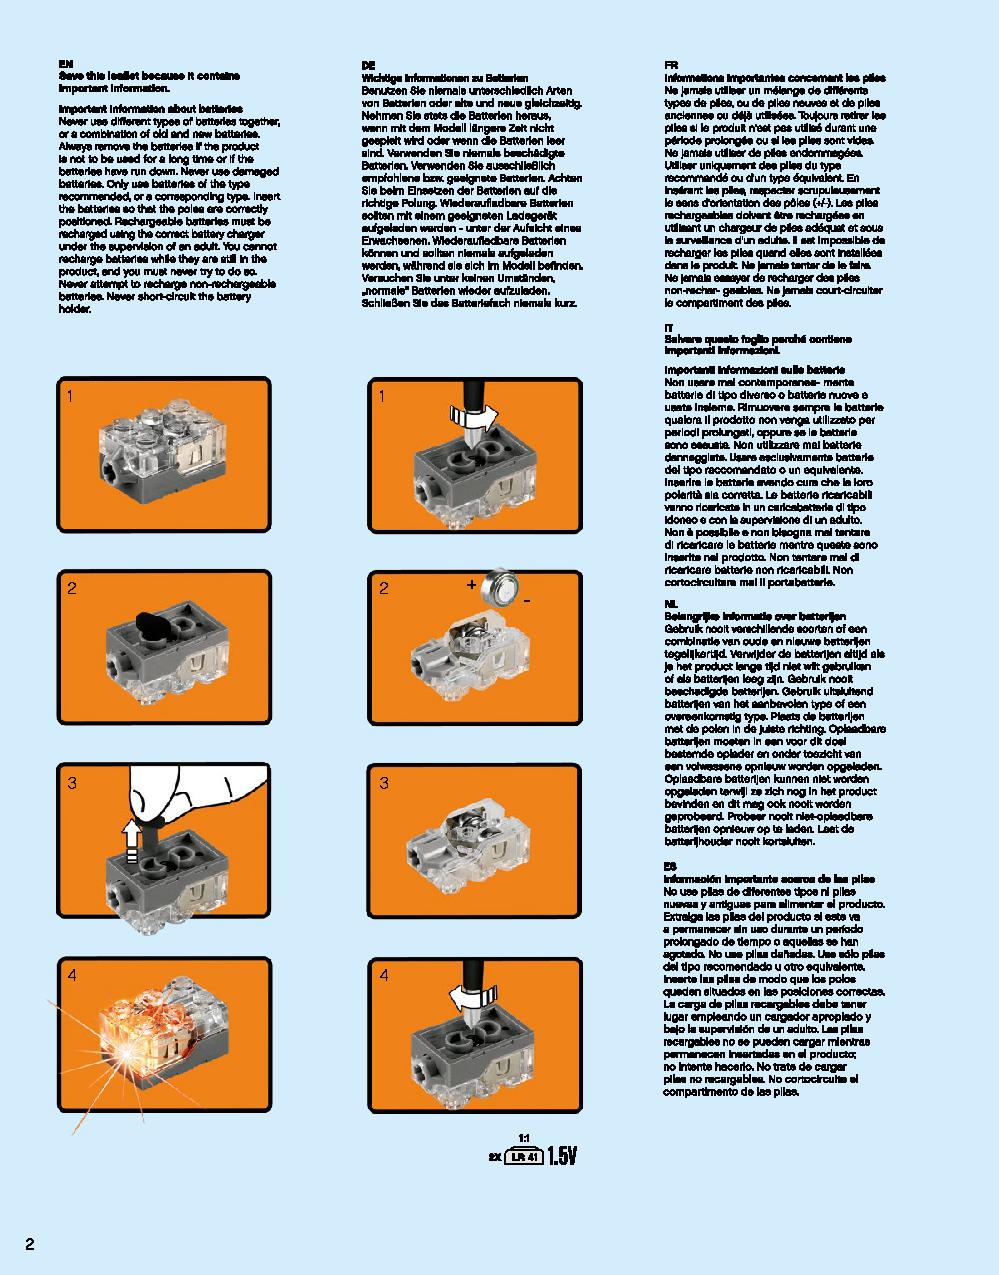 The Hulkbuster: Ultron Edition 76105 LEGO information LEGO instructions 2 page